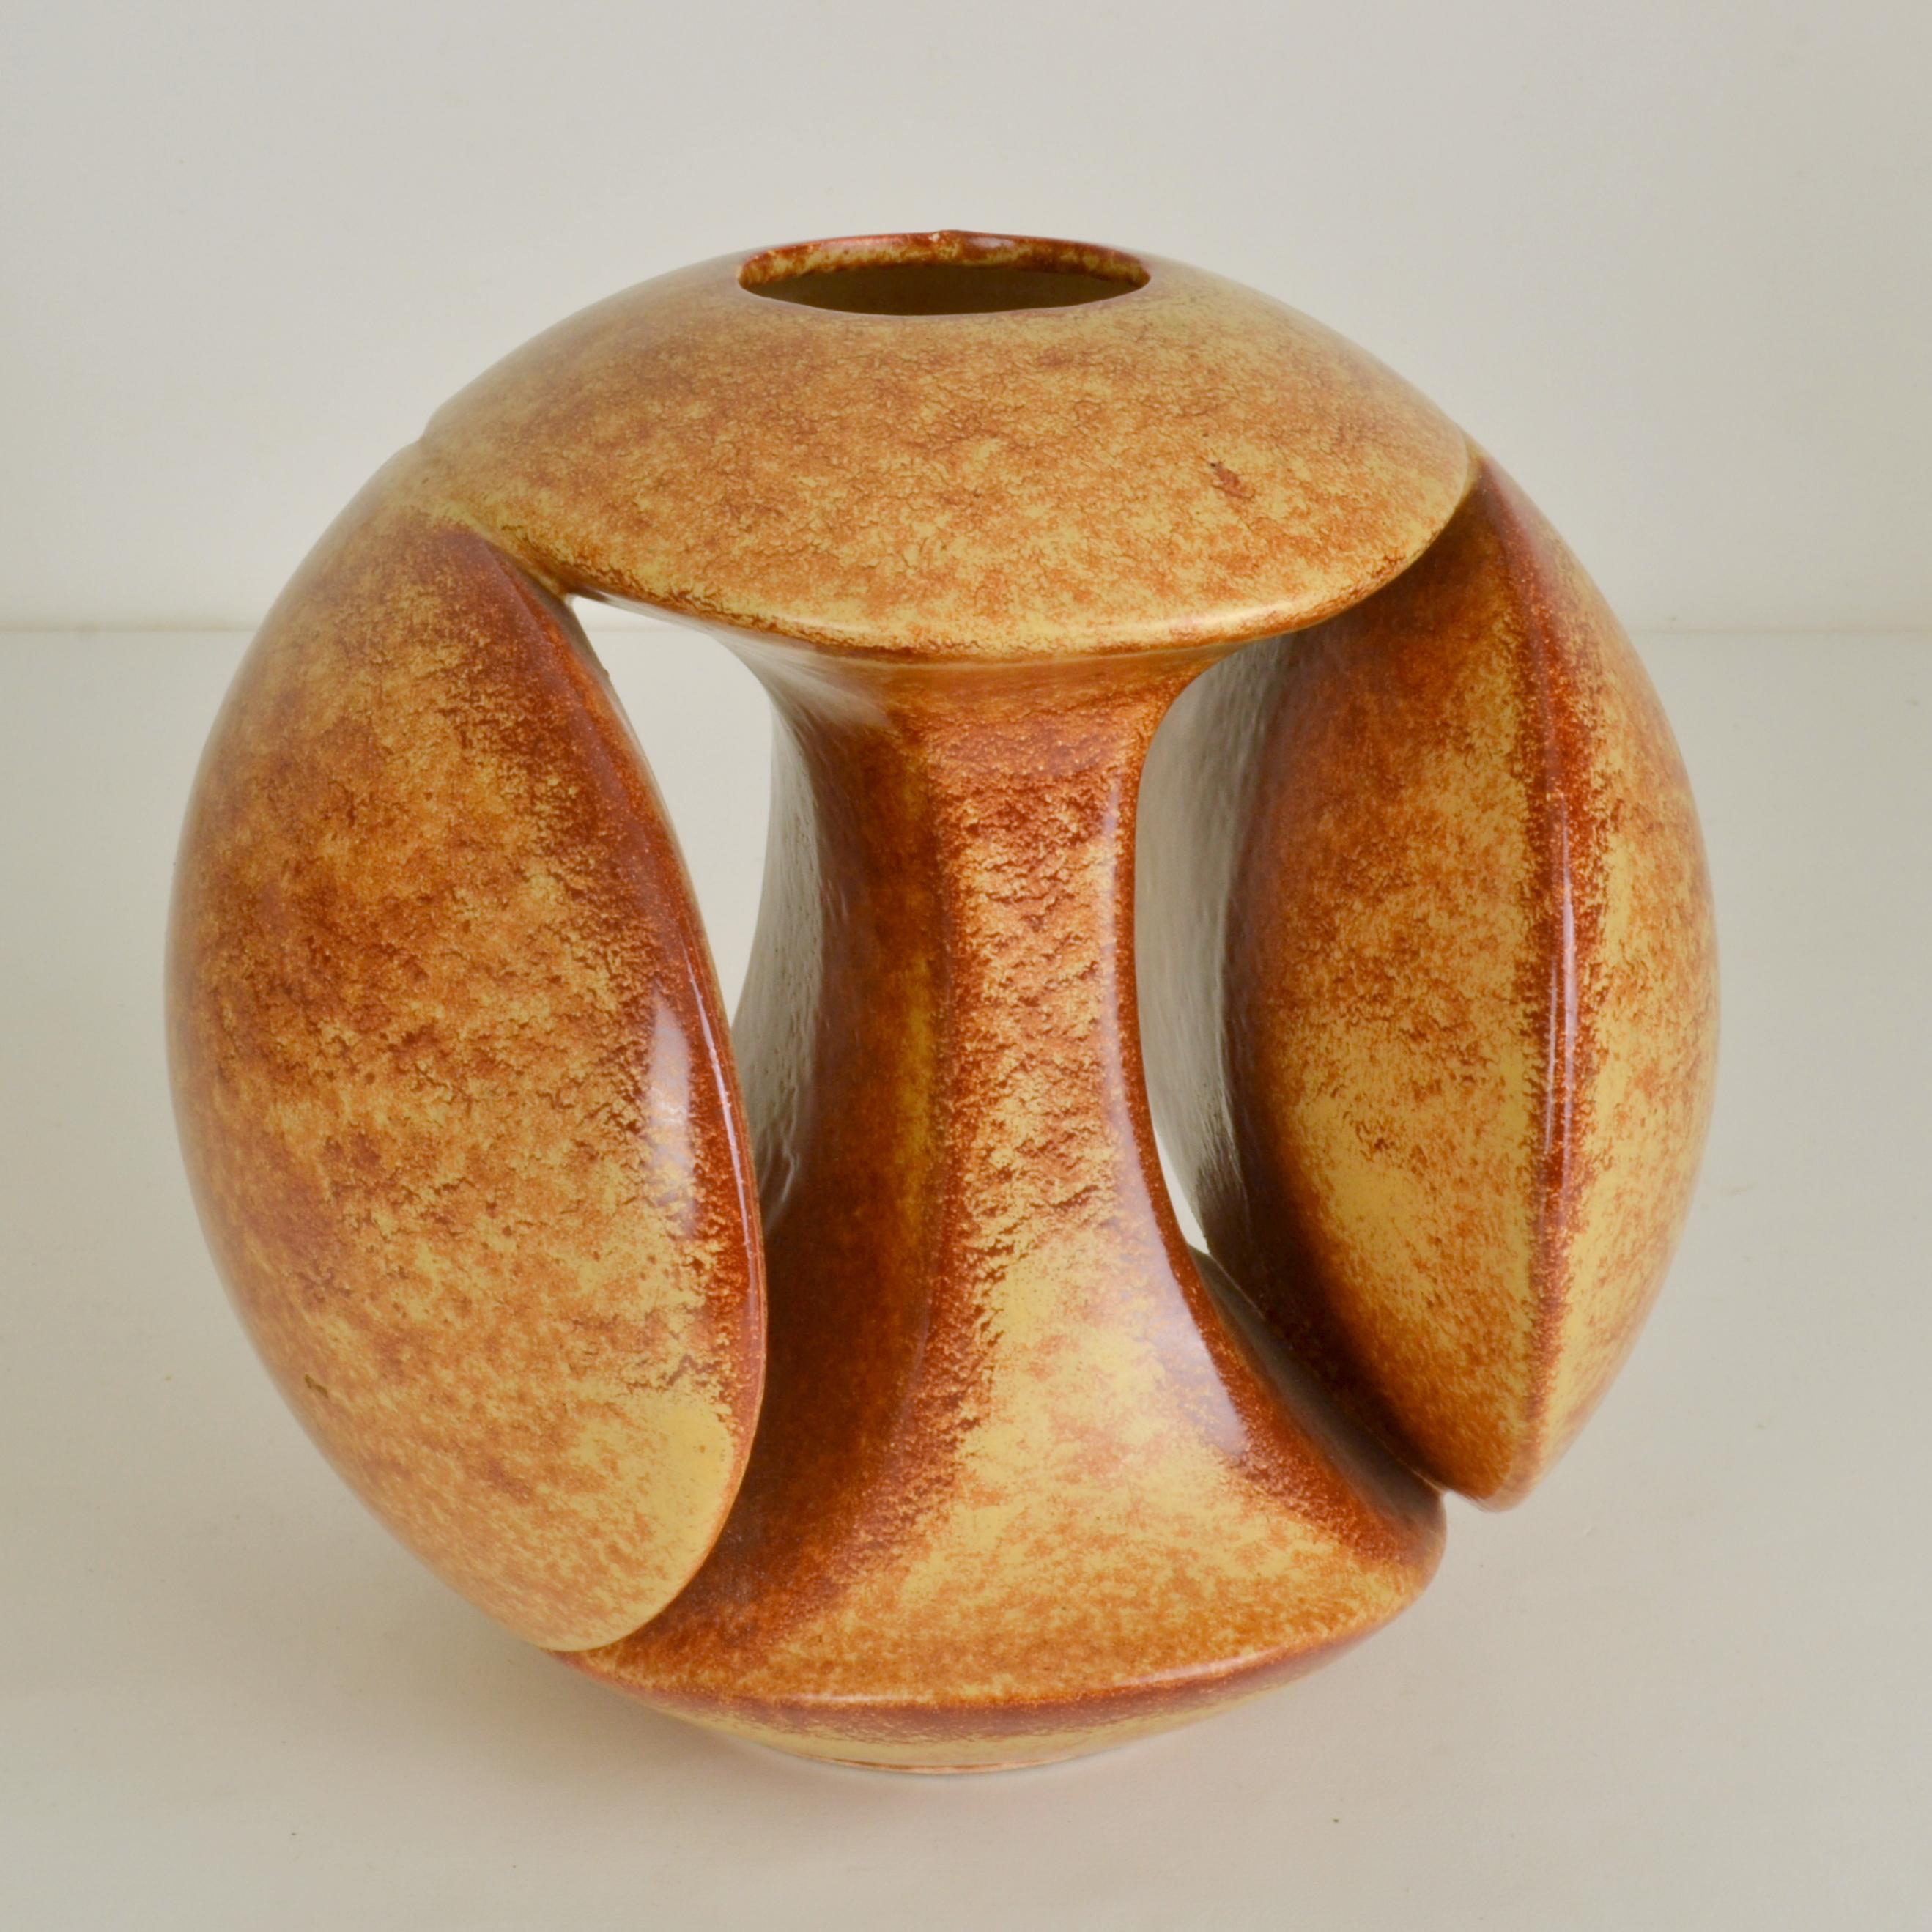 Sculptural Mid-Century Modern ceramic vase by Bertoncello, Iand designer Roberto Rigon, Italy, 1950s. The vase is build up from four circular shapes creating space in between the segments. Glazed in a beige terracotta with a sand-like red brown